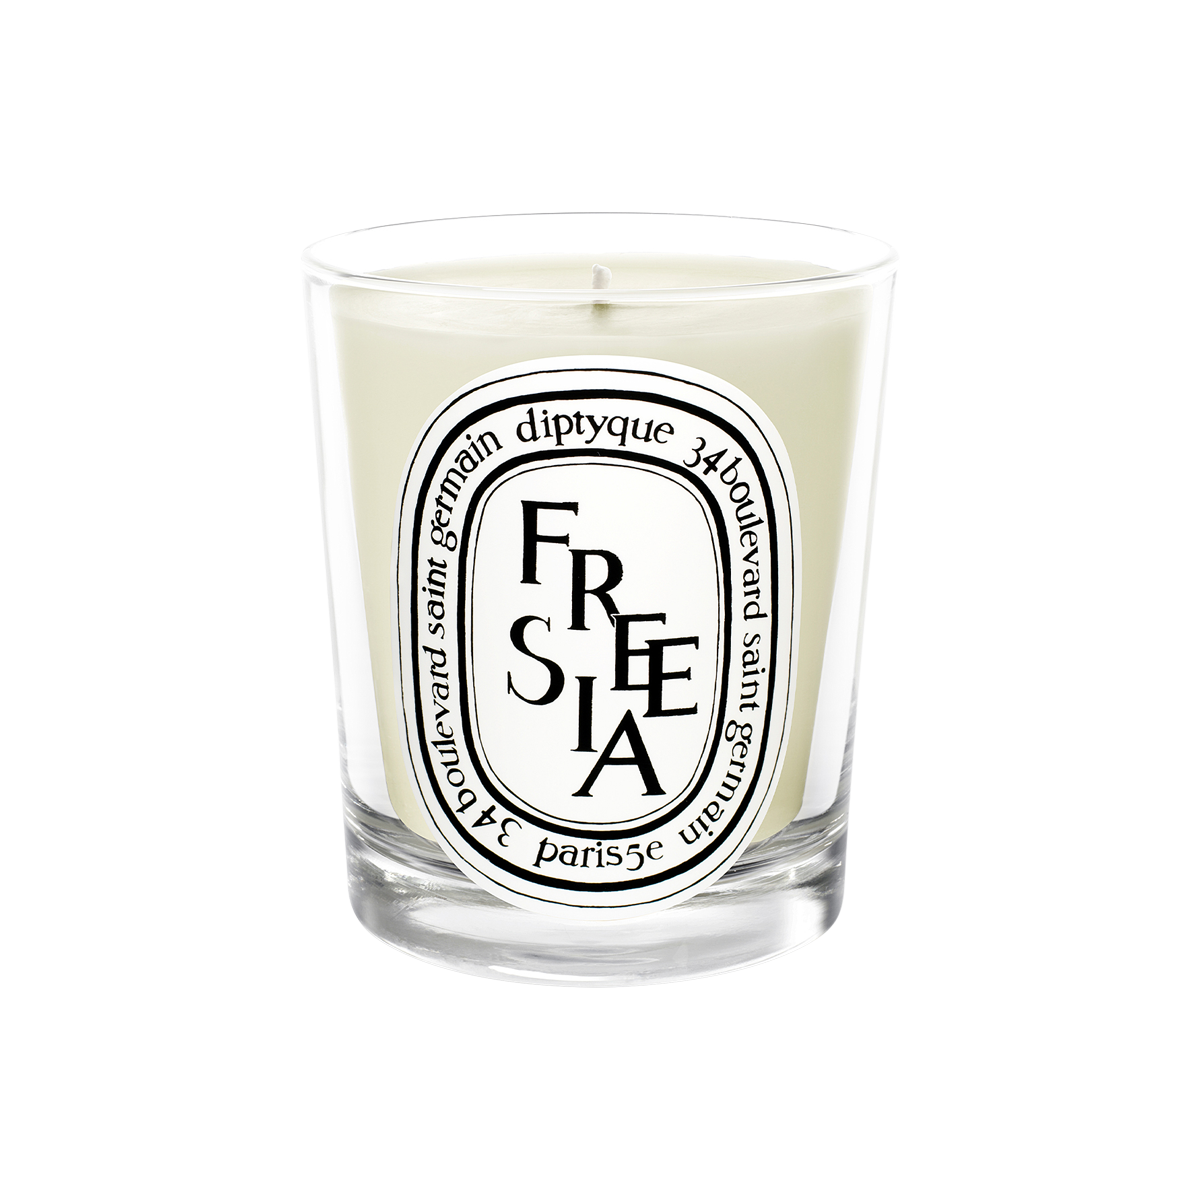 Diptyque - Freesia Scented Candle